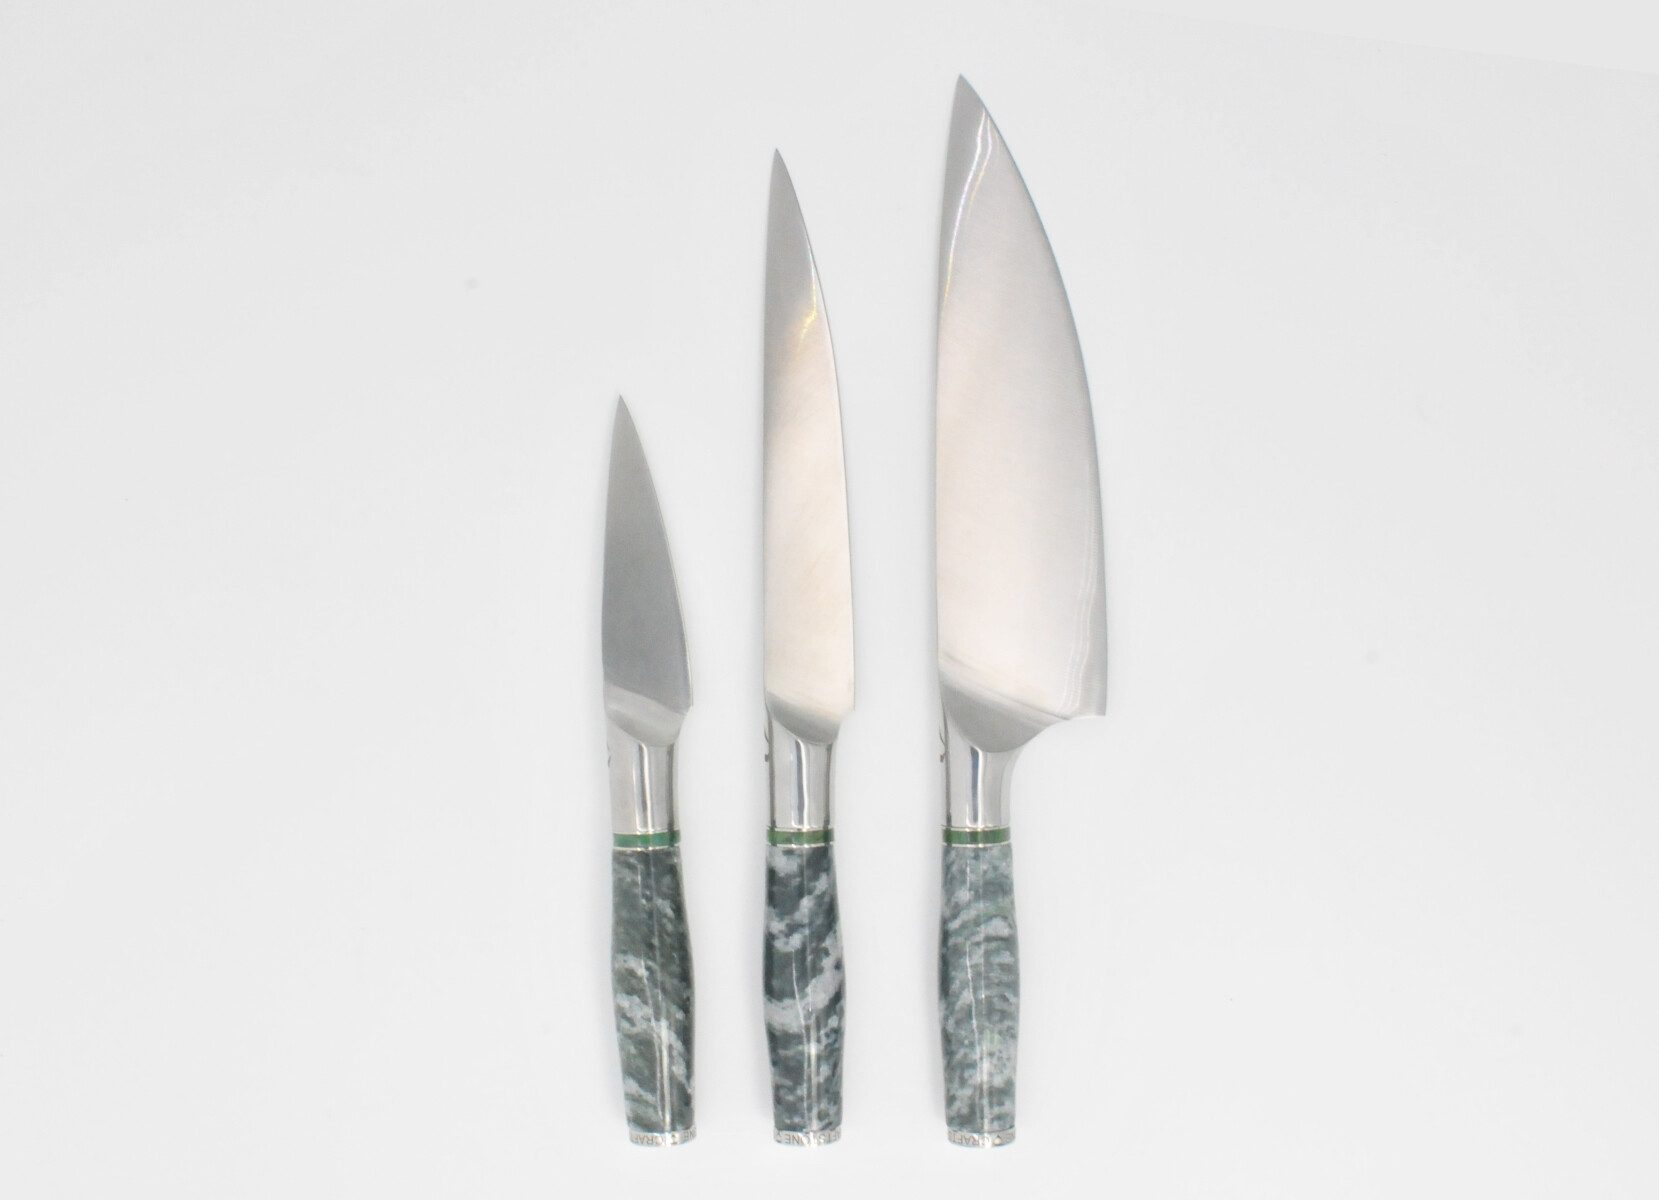 https://www.craftstoneknives.com/wp-content/uploads/bfi_thumb/3-Knife-Set-with-a-Mossy-Green-Marble-Handle-a-Cubic-Zirconia-Peridot-Color-Stone-at-the-Back-of-the-Knife-and-Green-Jade-and-Stainless-Steel-Decorative-Rings-3jbc82noutg3img7ftmya2.jpg